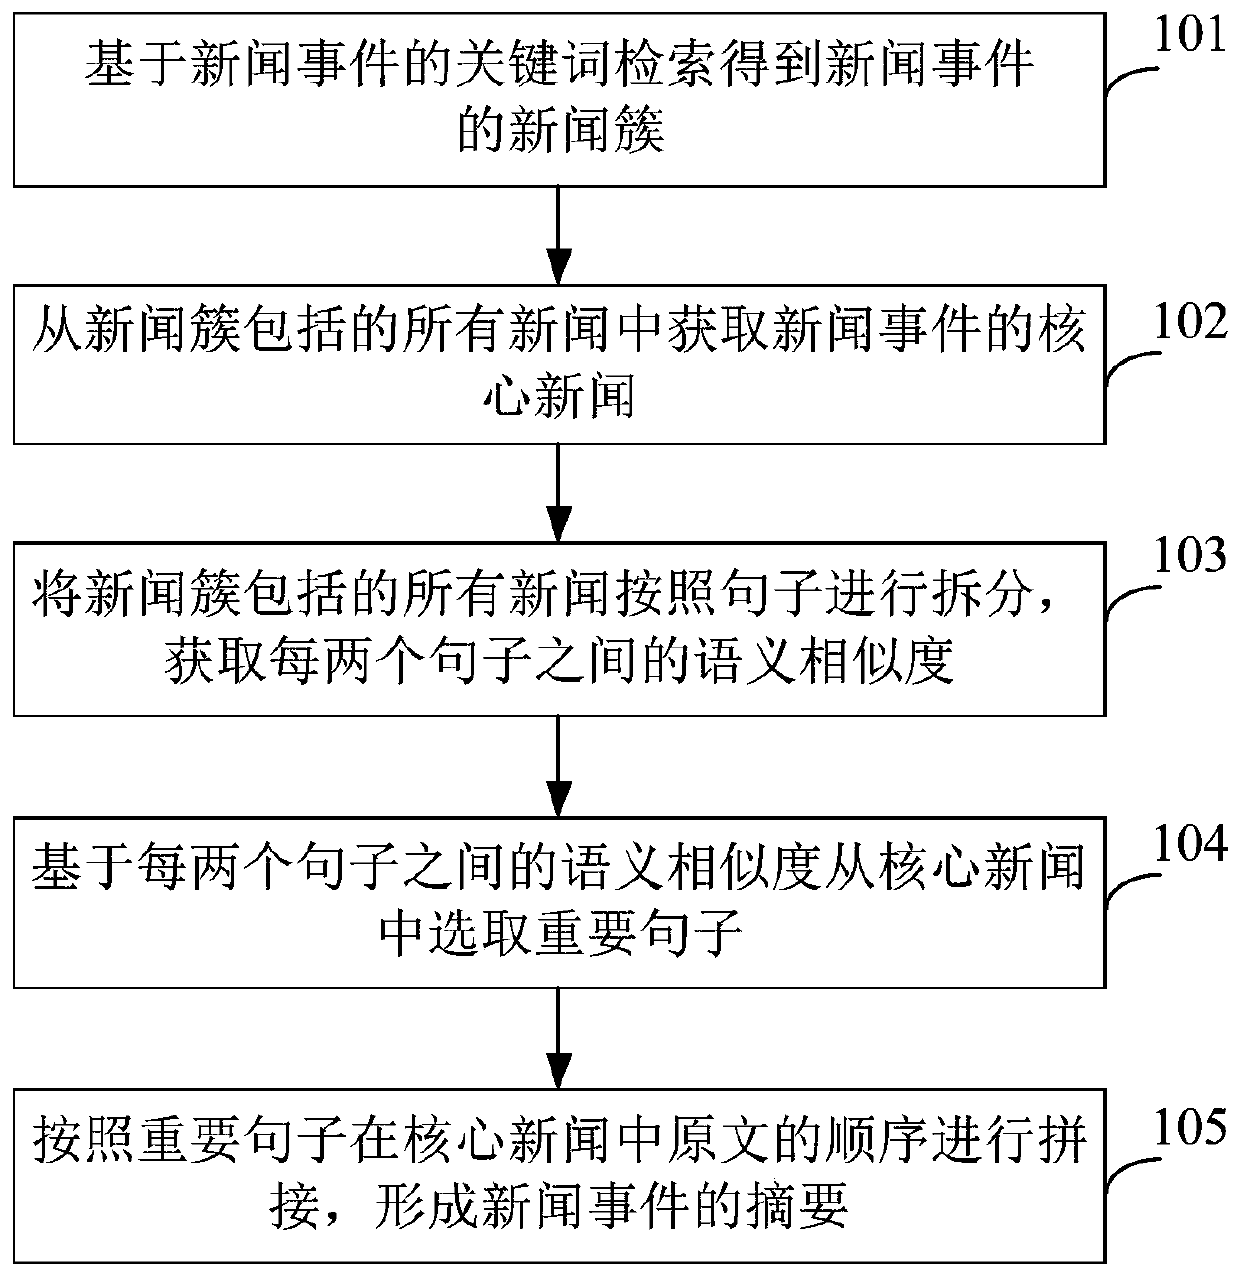 Method and device for extracting news summaries based on artificial intelligence